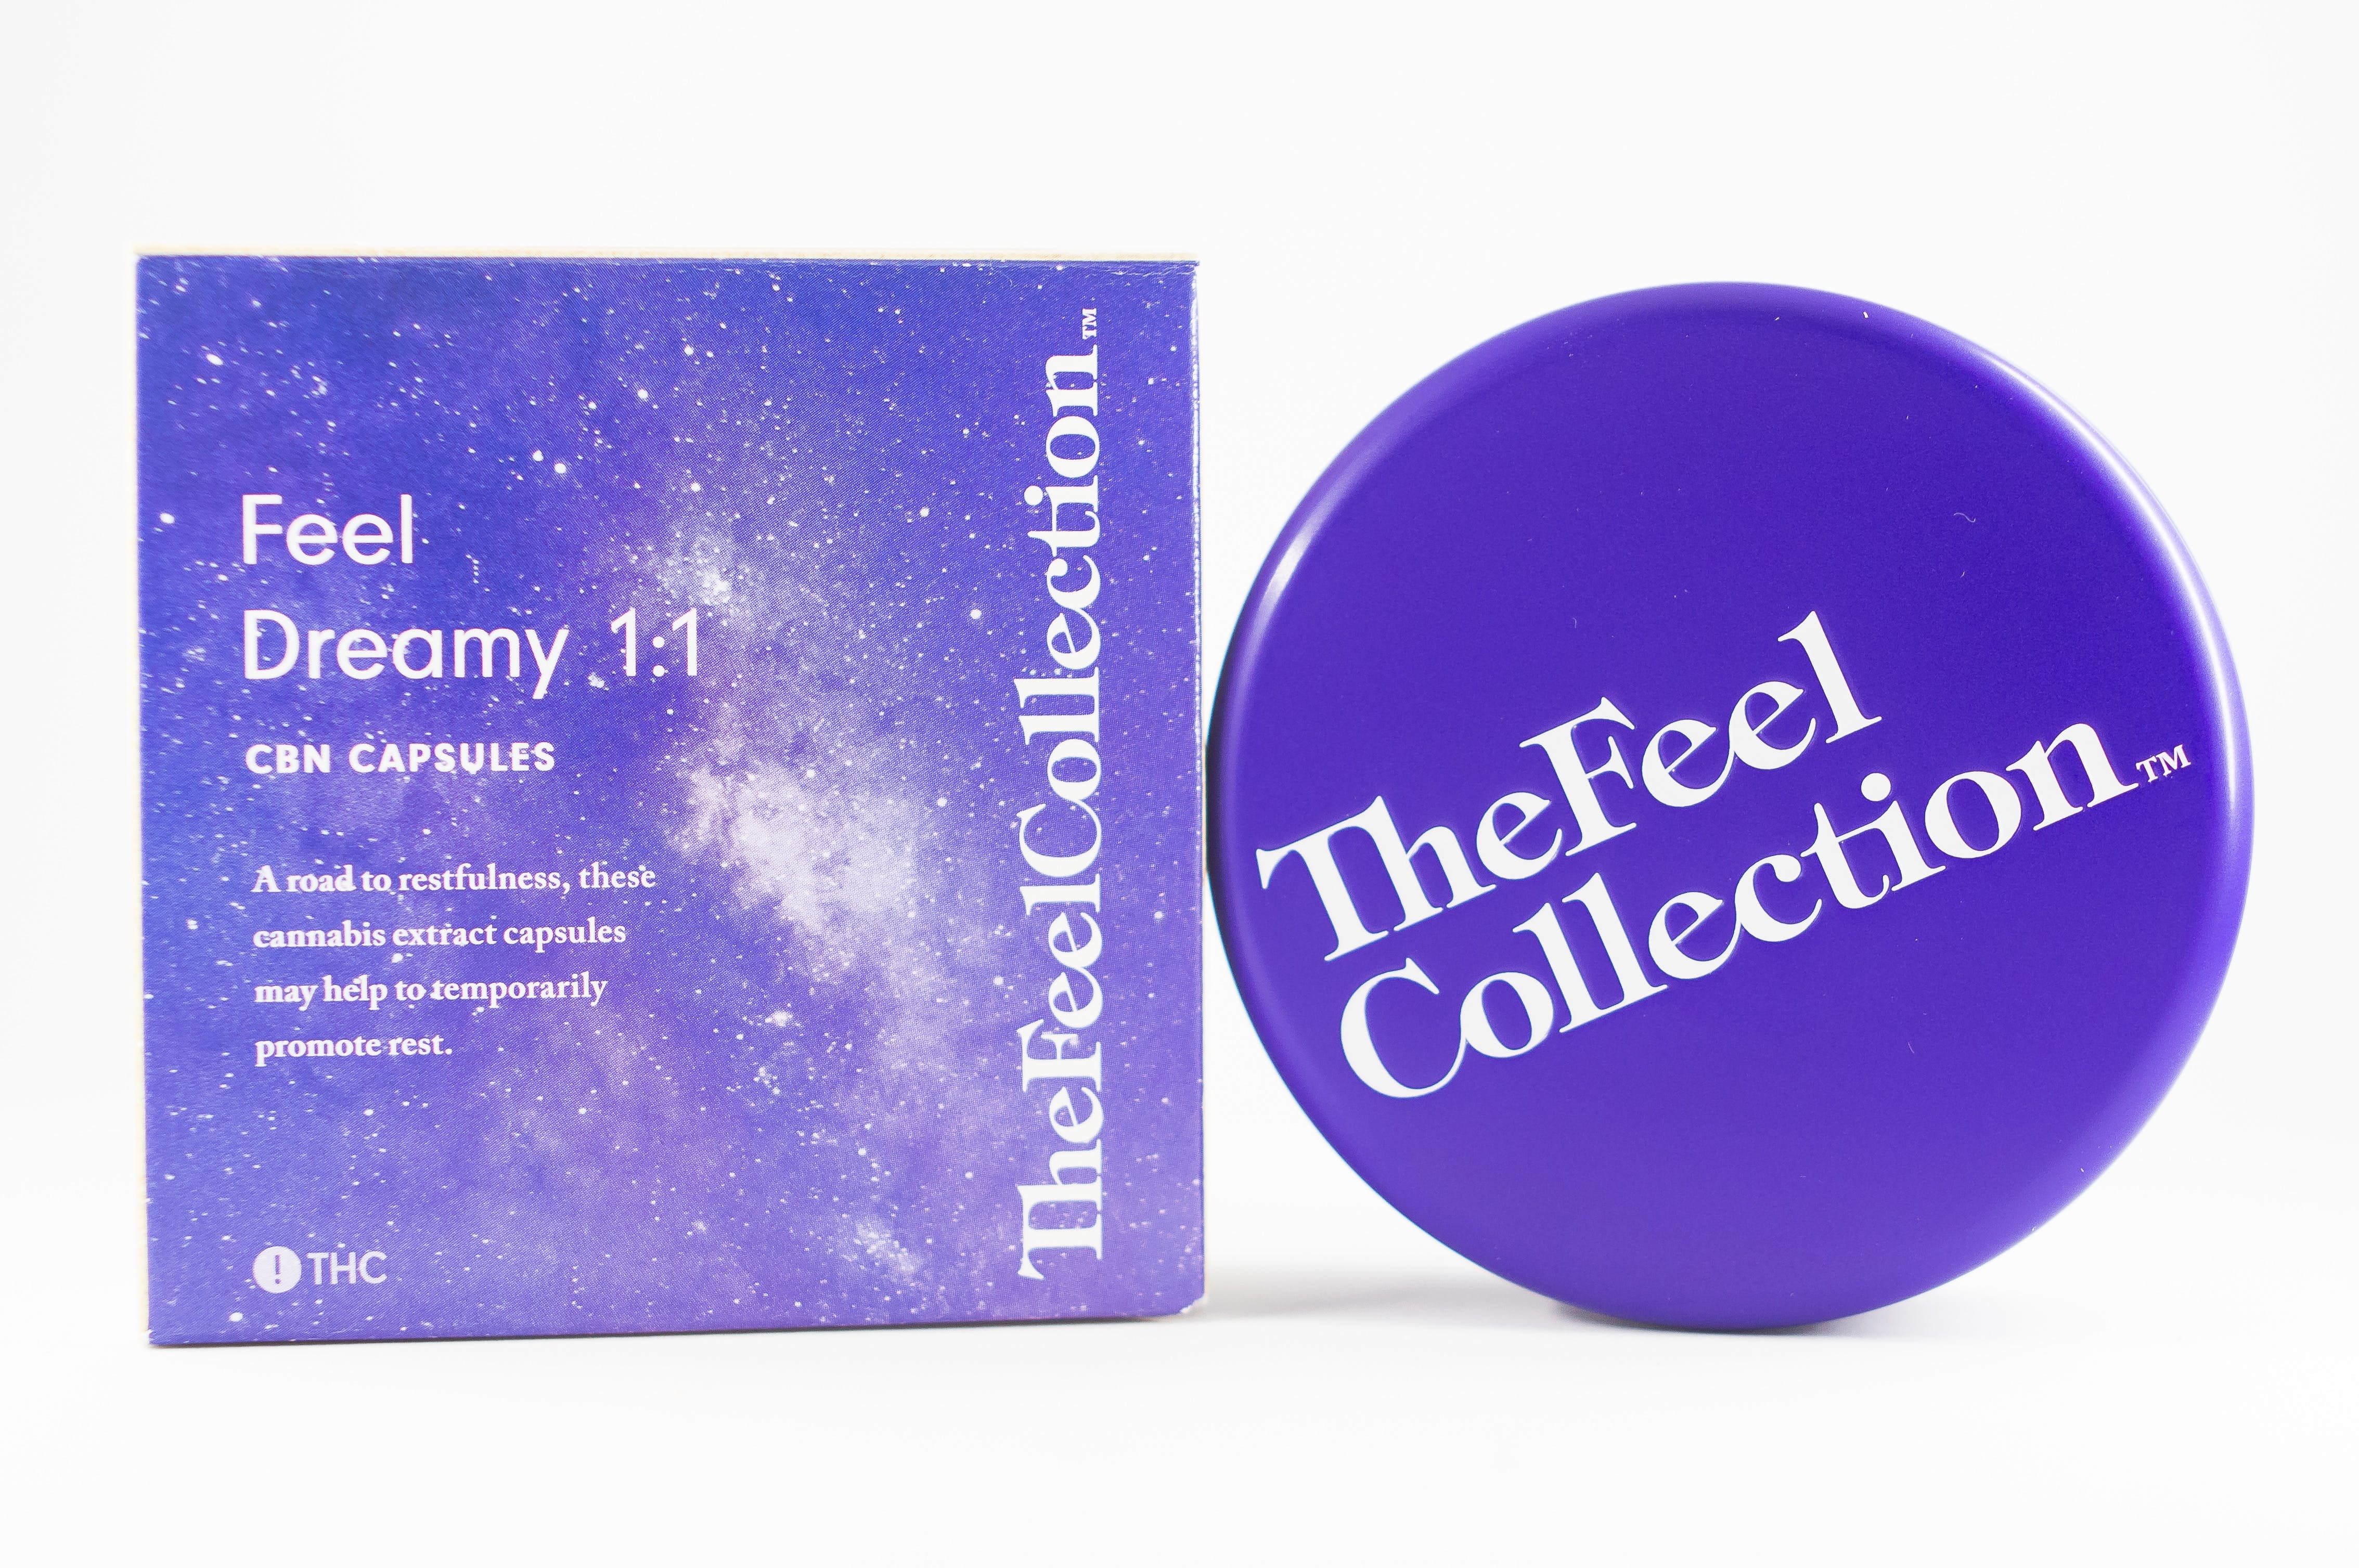 concentrate-feel-dreamy-11-capsules-by-the-feel-collection